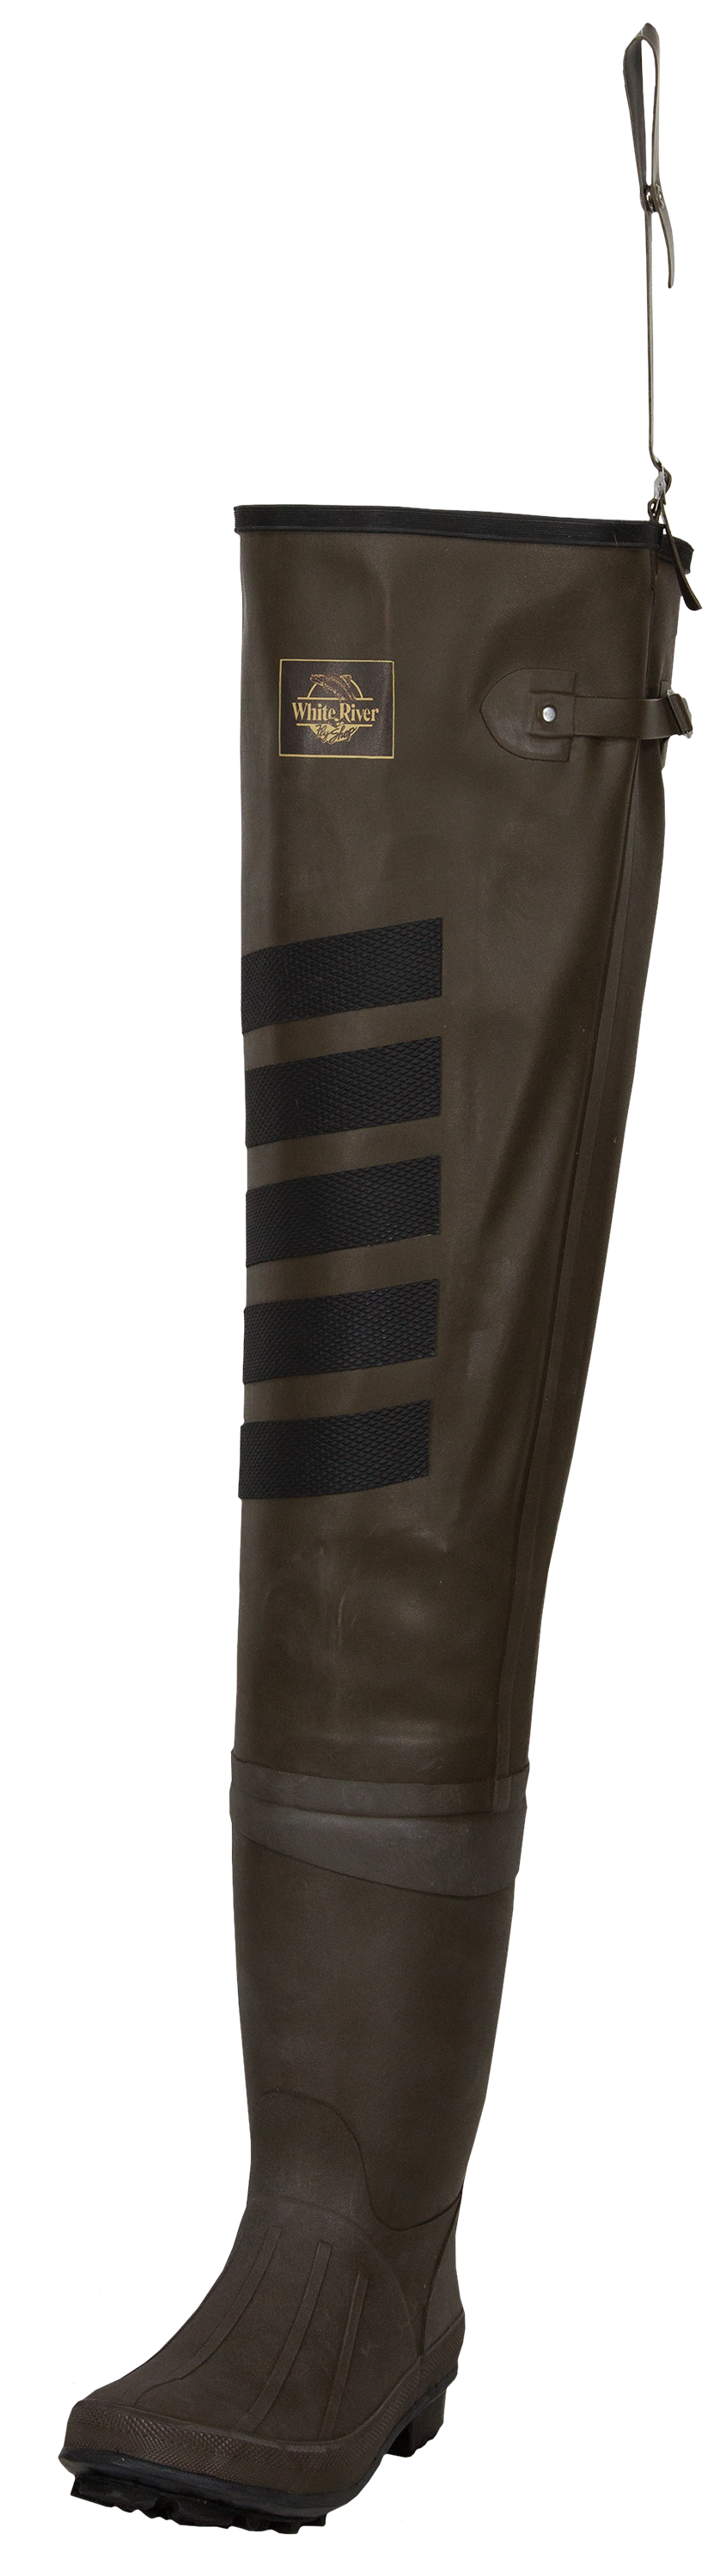 White River Fly Shop Waterproof Rubber Boot-Foot Hip Waders for Men - Brown - 10